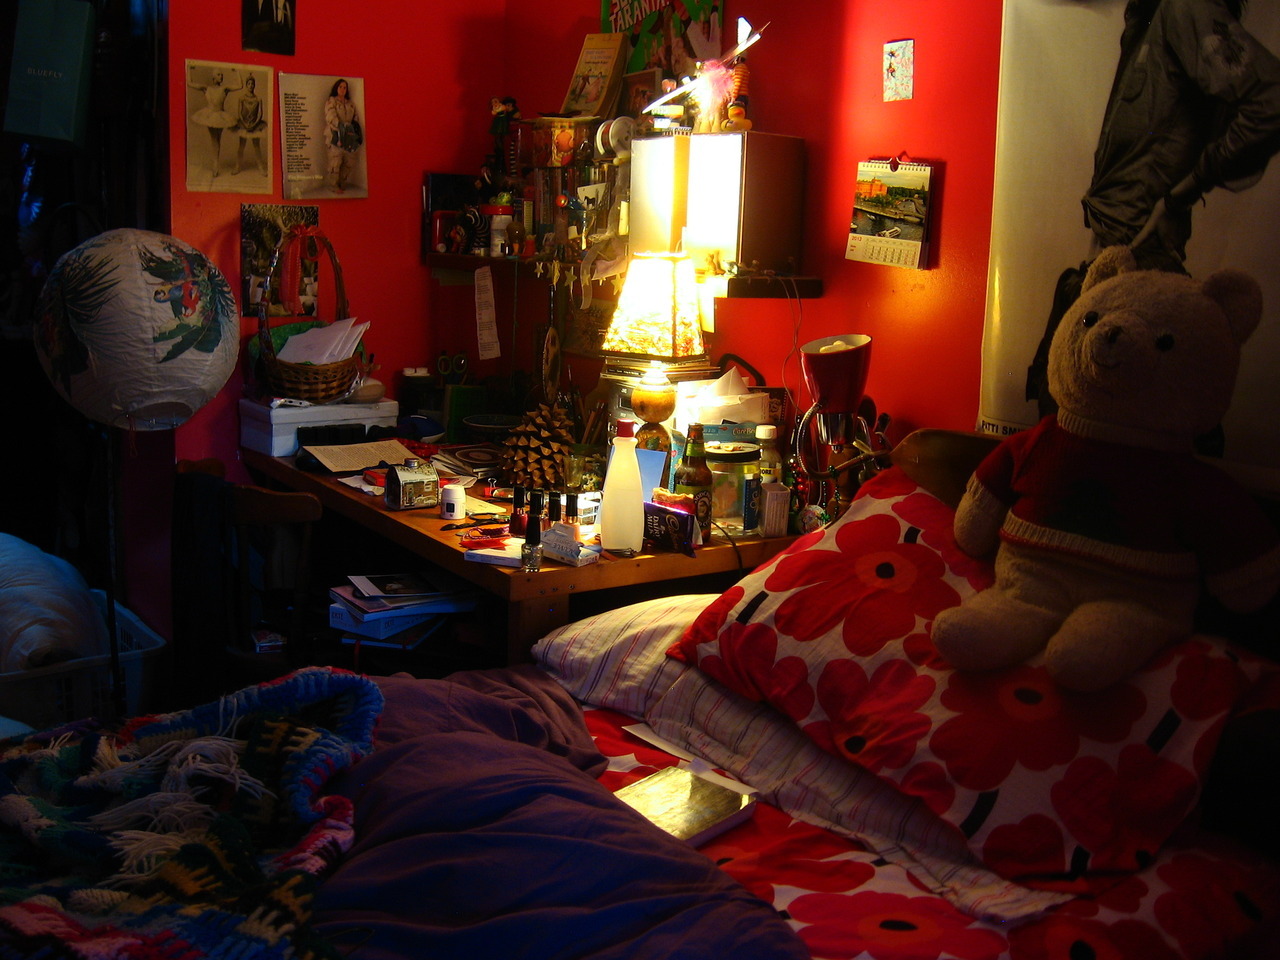 This is my room at present, me at age 22. I just graduated from ...